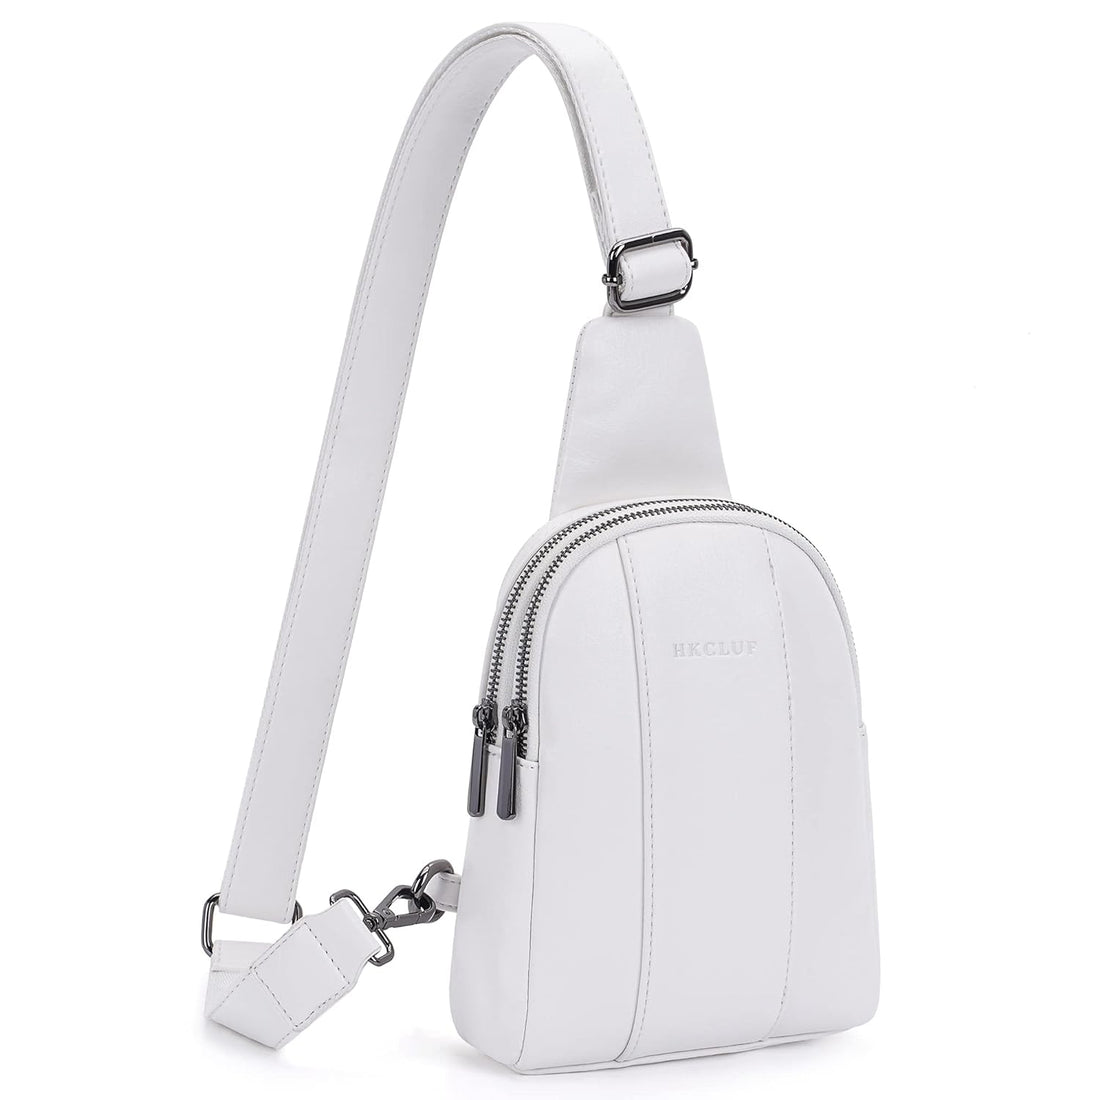 HKCLUF Sling Bag for Women Vegan Leather Chest Bag Small Crossboday Fanny Pack Cell Phone Sling Purse with Adjustable Strap, 03-white, Fashion